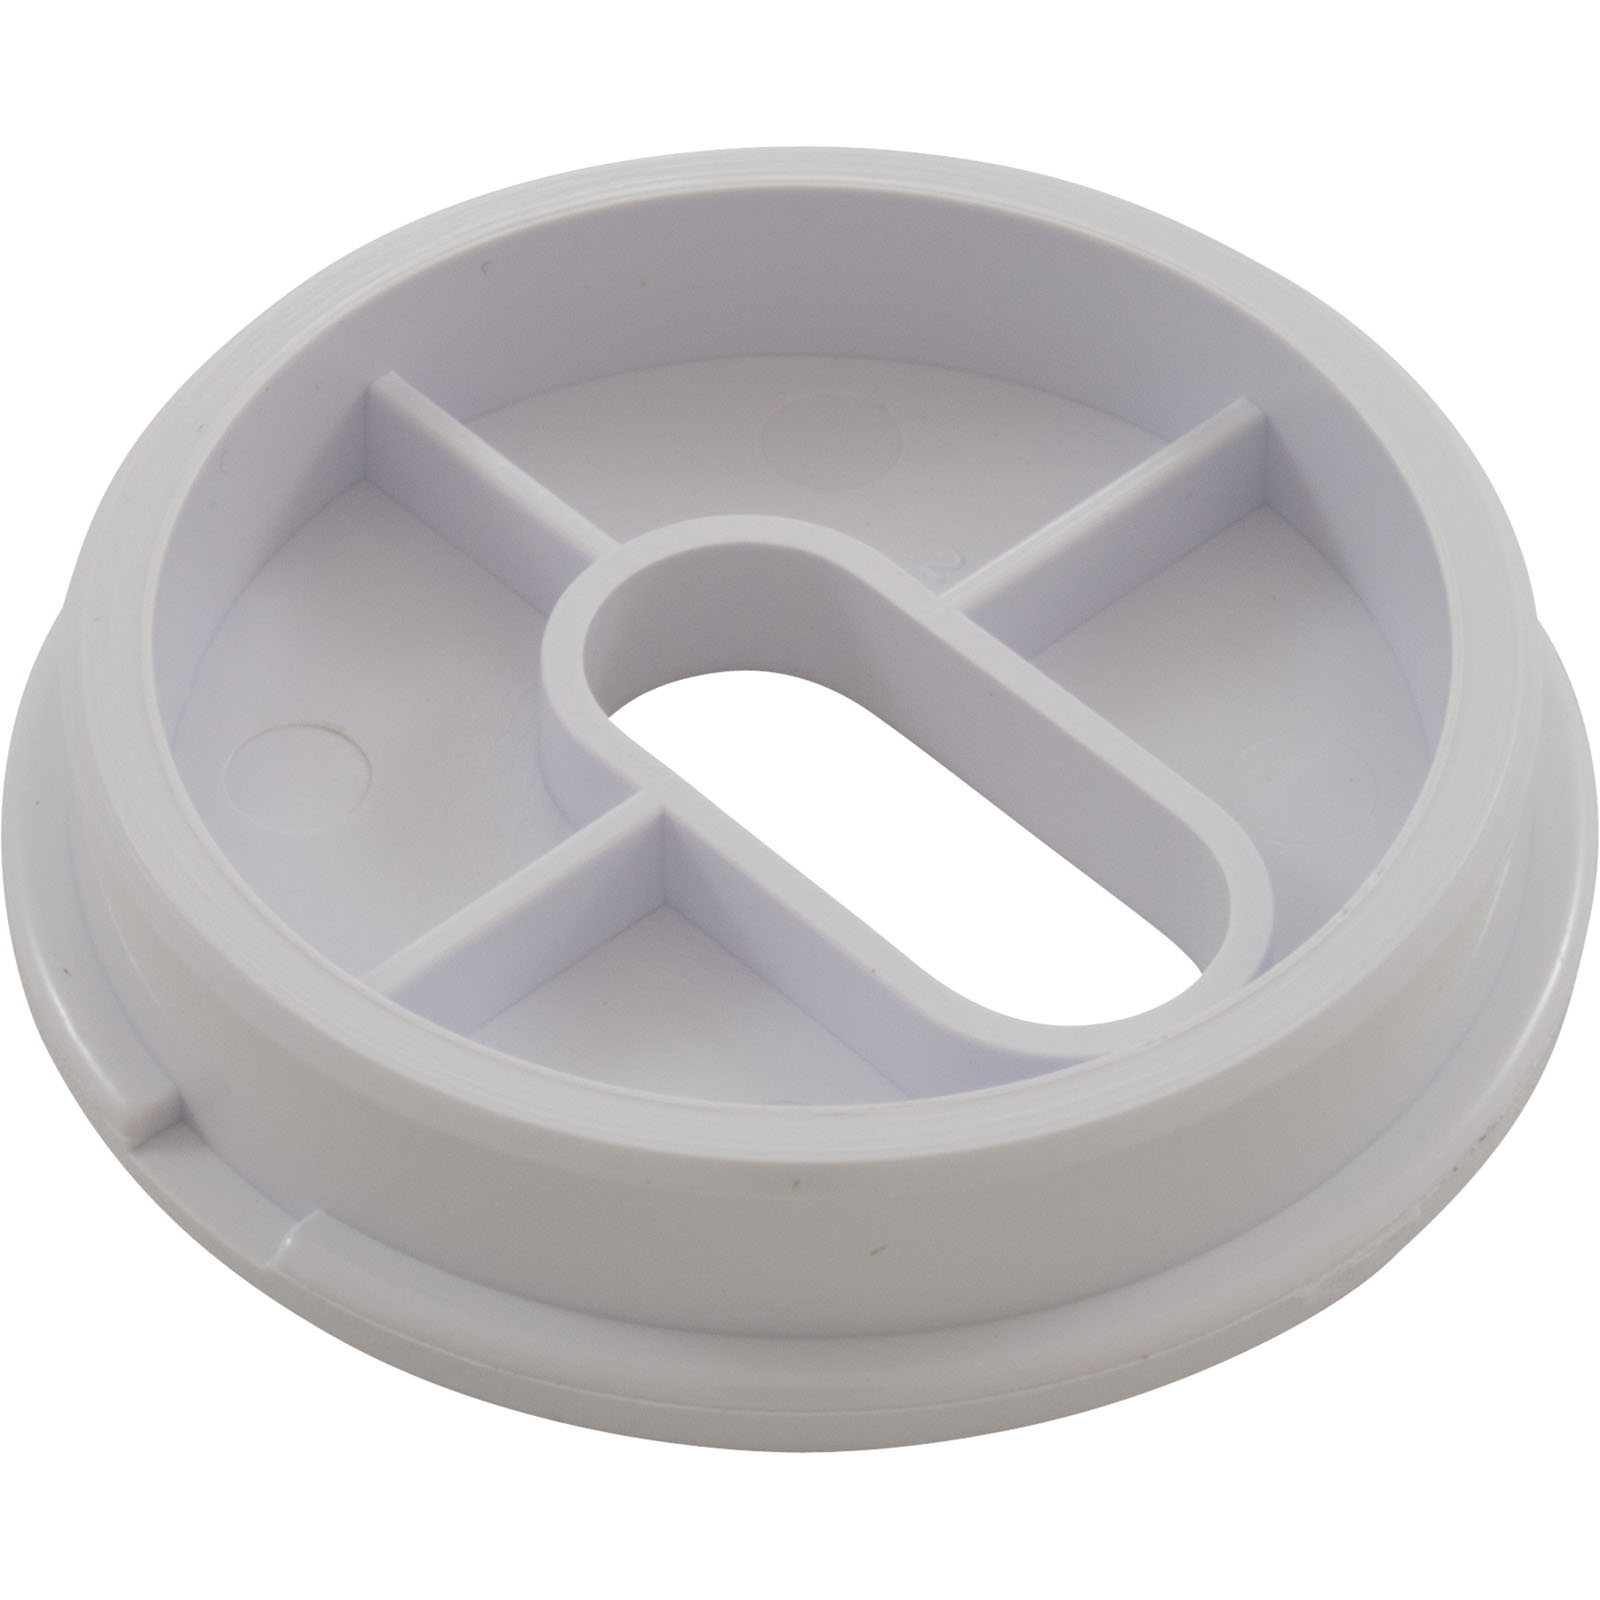 Picture of Deck Jet (J-Style) Round Cap White